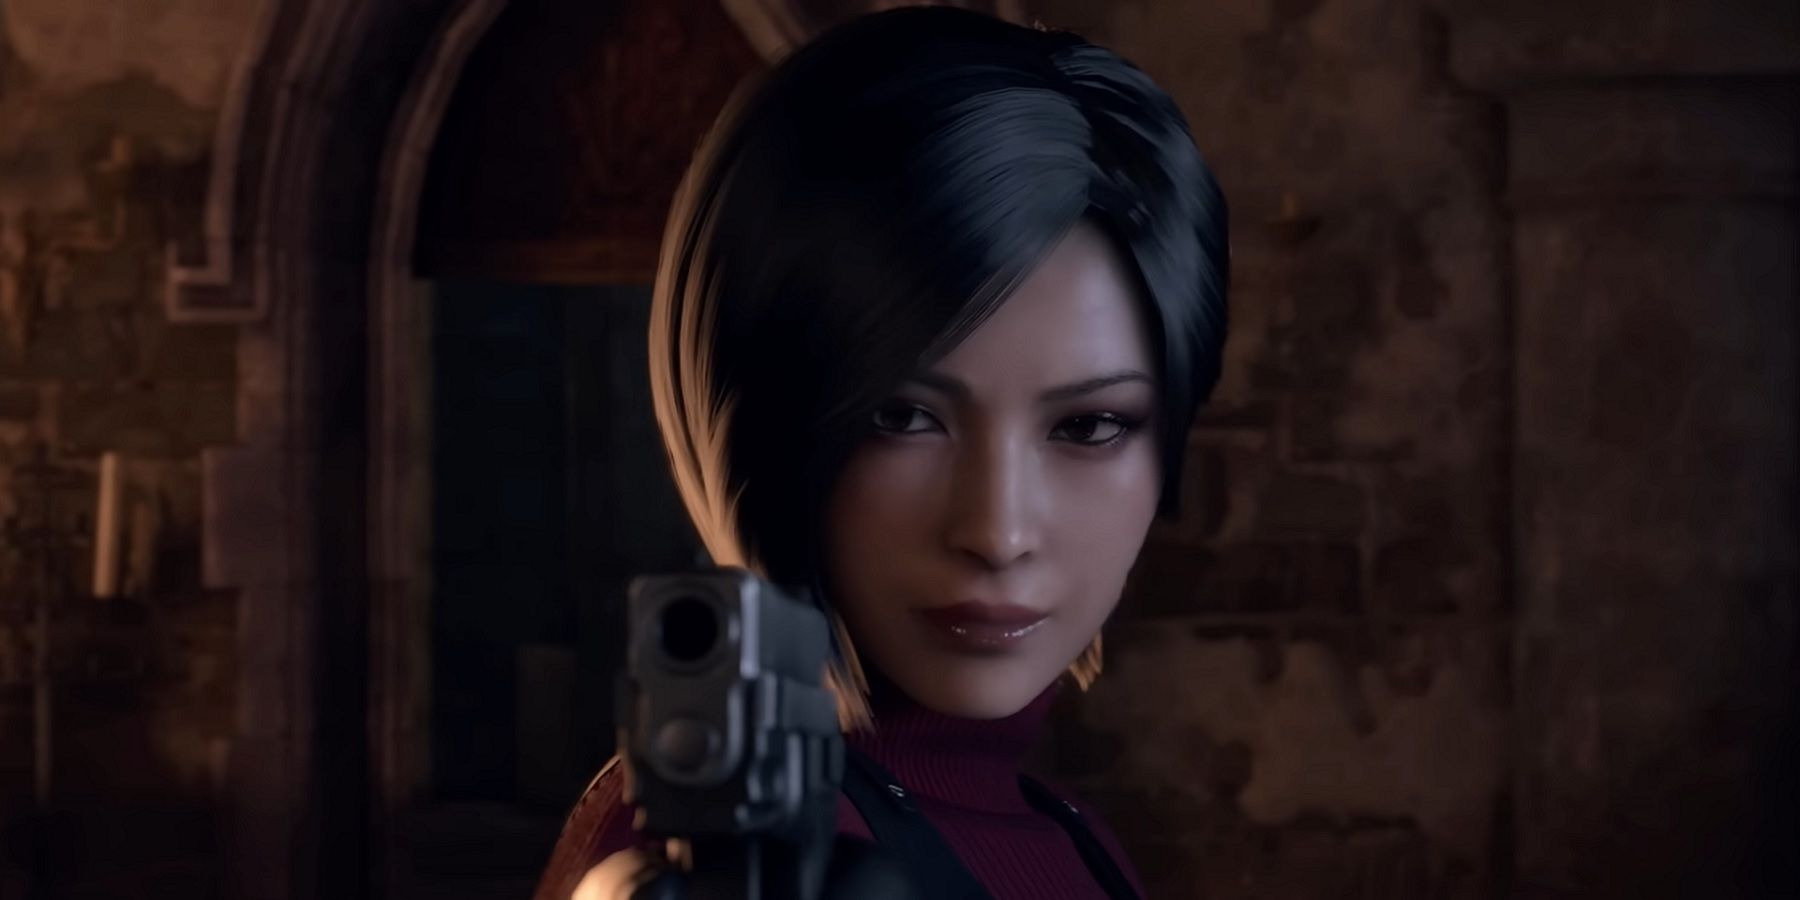 Resident Evil 4 Remake Ada Wong Voice Actor is Being Harassed